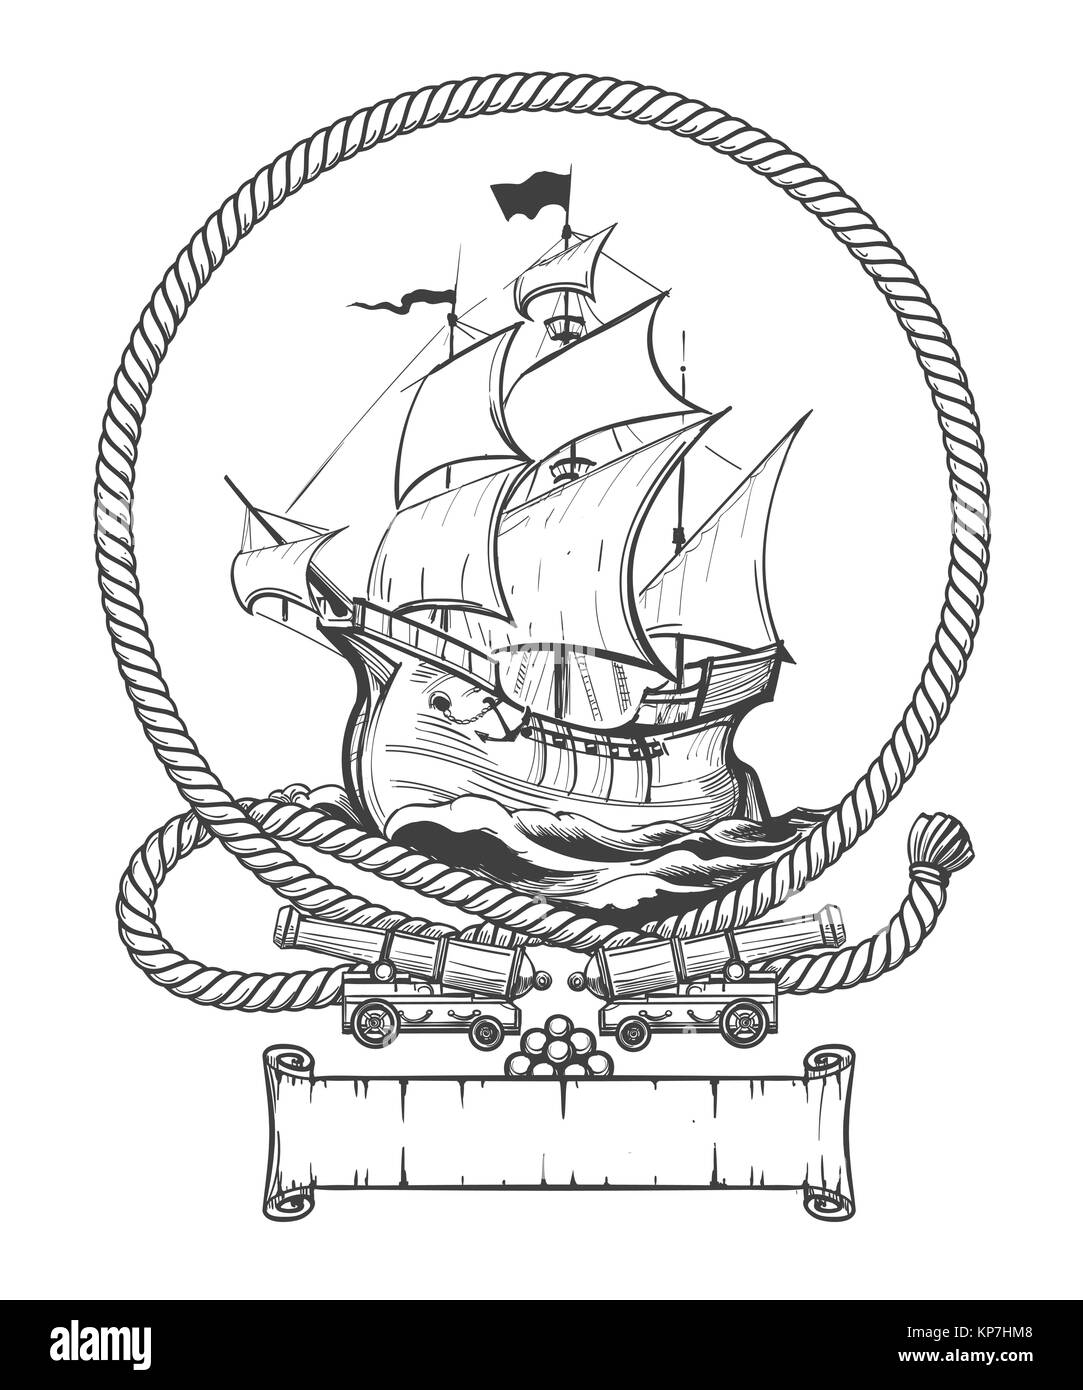 Sailing ship in rope frame with ship cannons drawn in engraving style. Vector illustration. Stock Vector